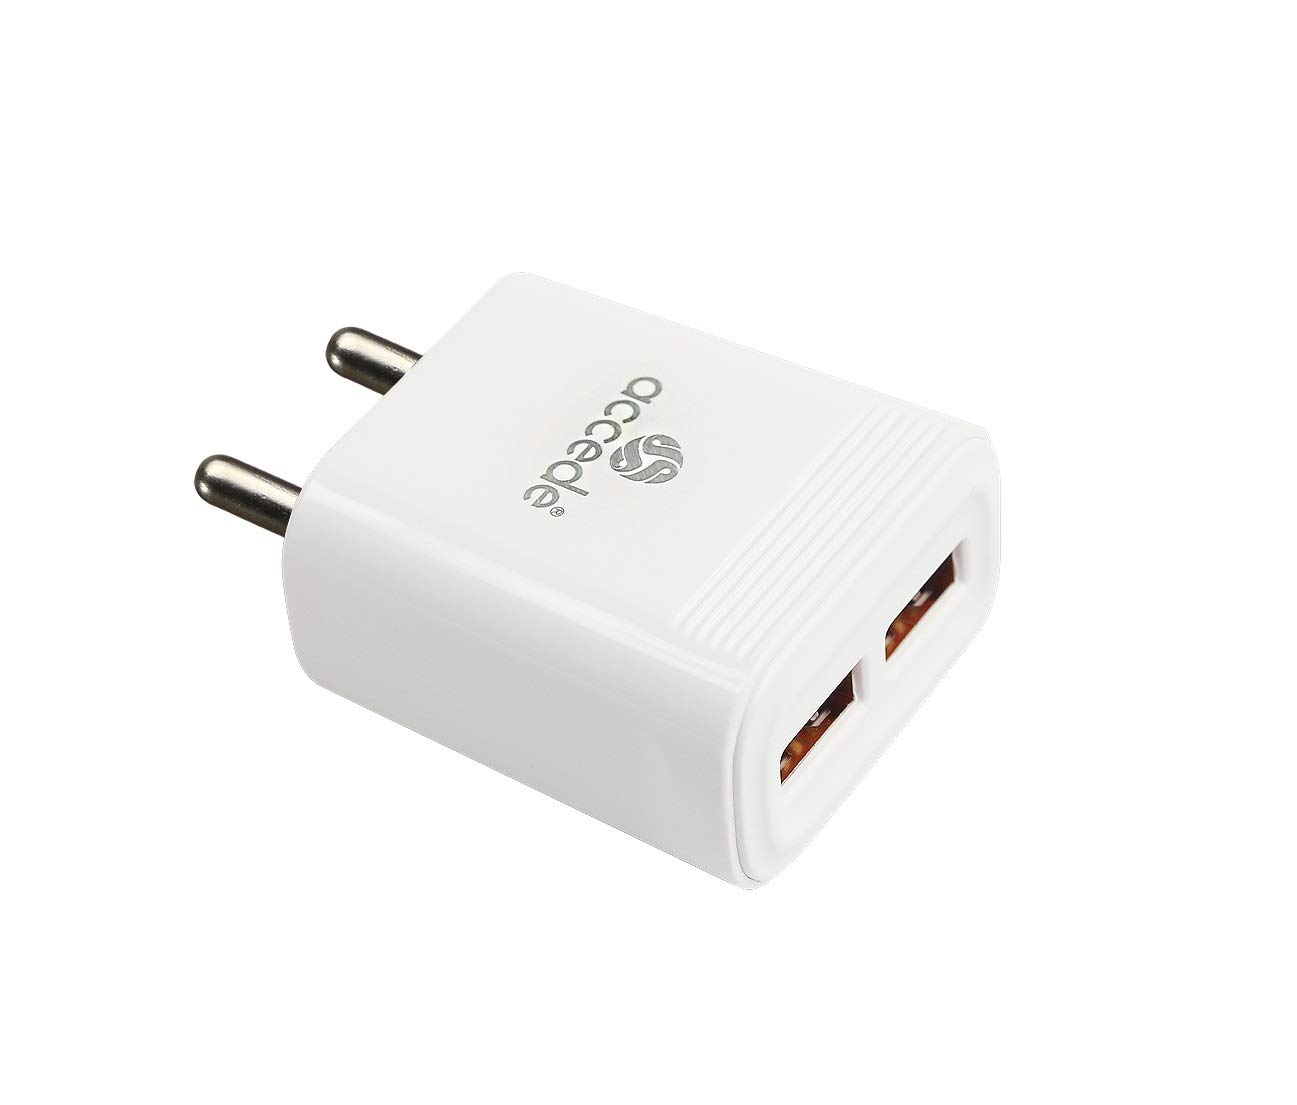 ACCEDE ZAPPER DUAL USB MICRO CHARGER 2.4A